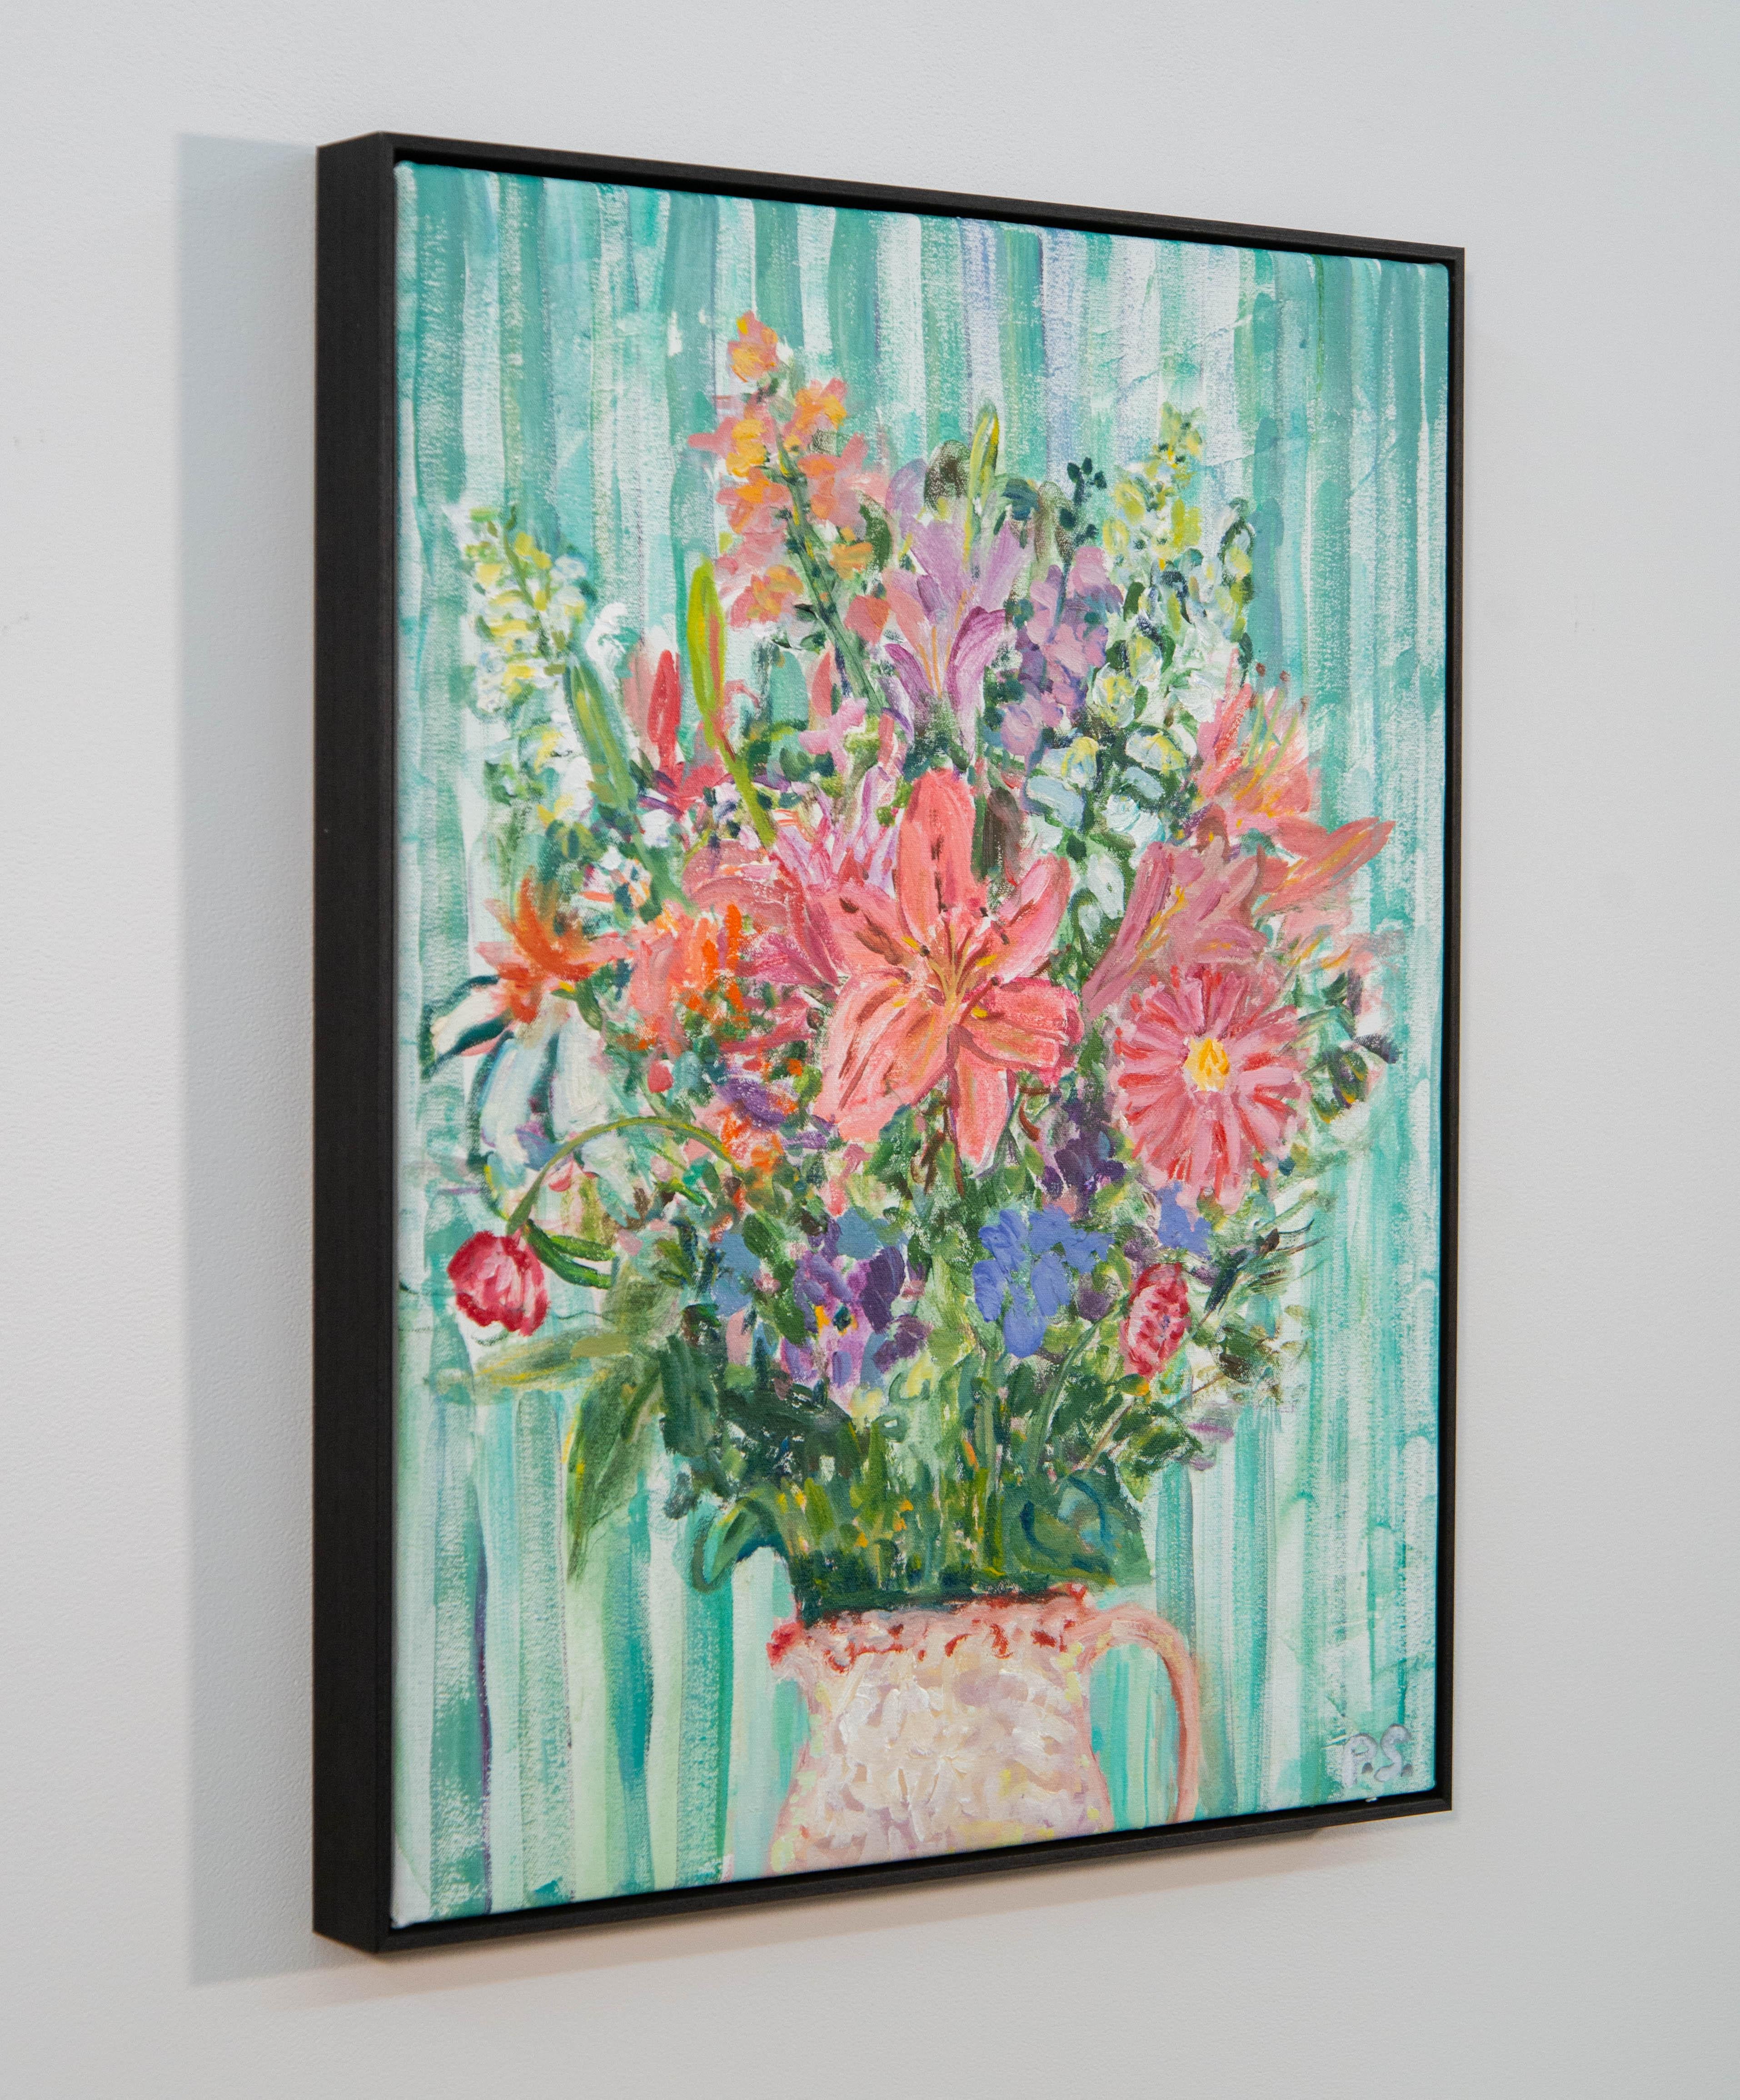 A pretty, mixed floral bouquet fills the canvas with joyful colour in this still-life painting by Pat Service. The Canadian artist explored the traditional art form in the 1990’s but in her own masterful, unique way. The palette is a colourful mix